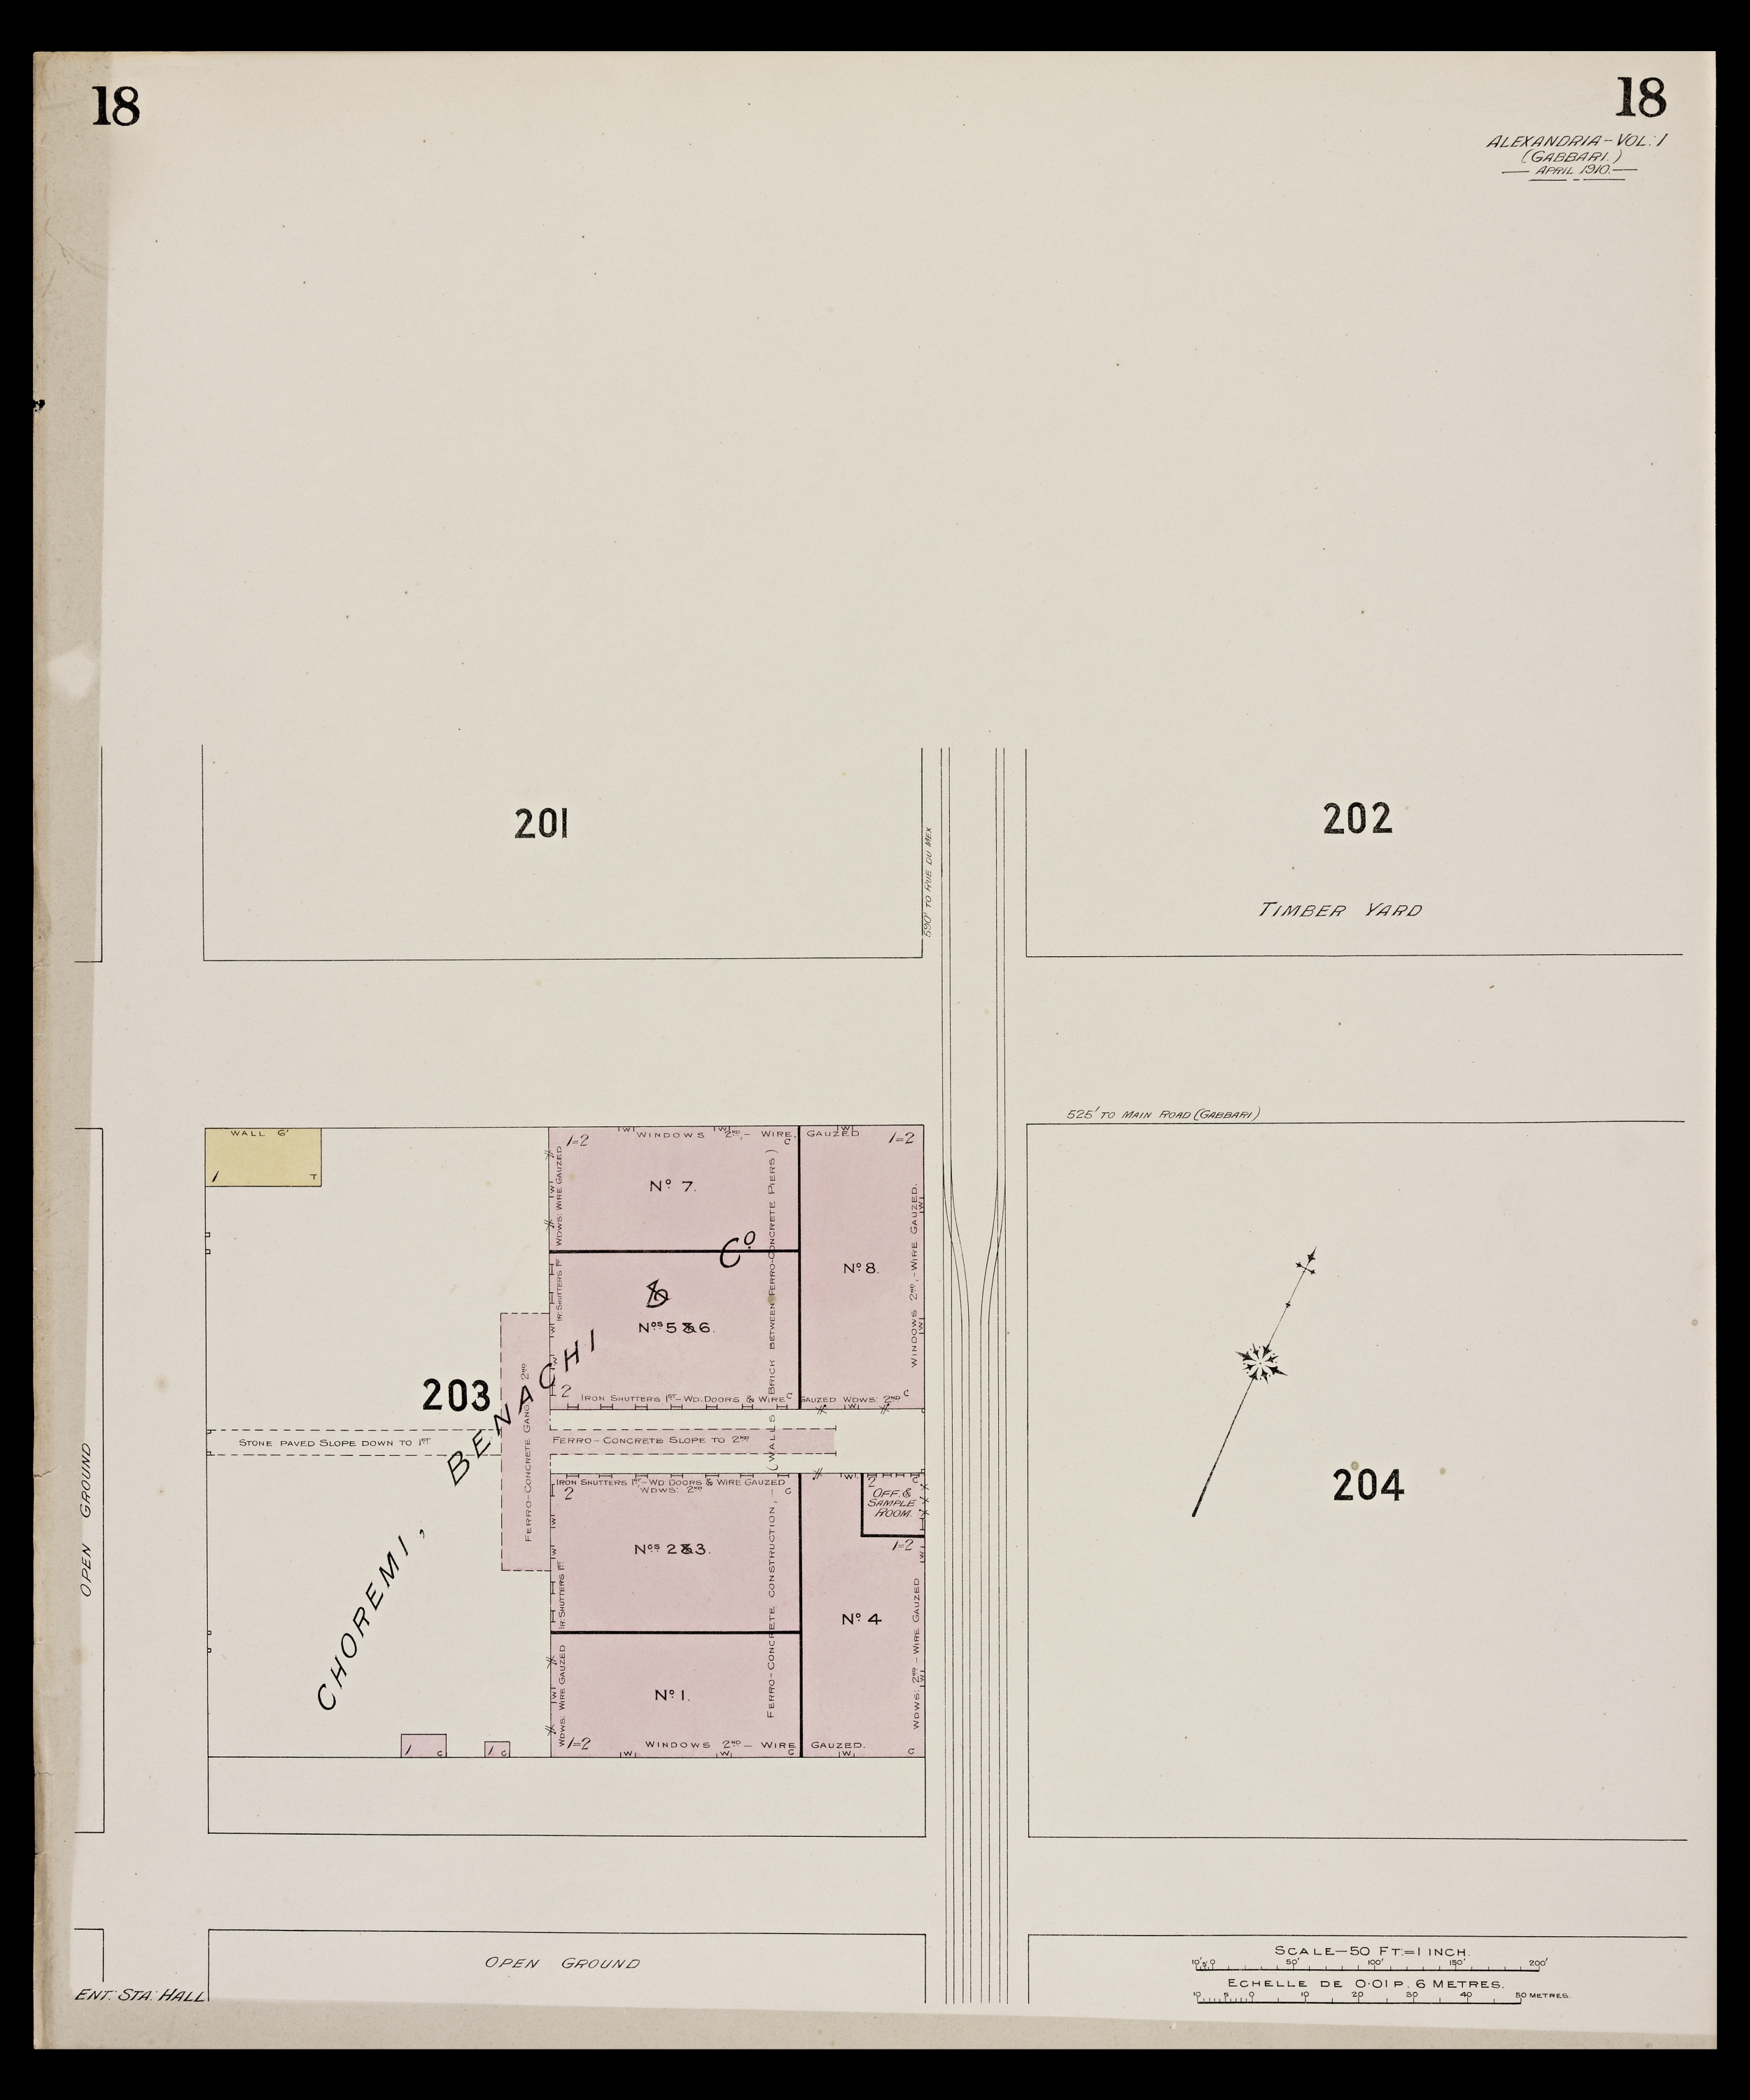 Alexandria  - A sheet from the&nbsp;<span style="font-style: italic;">Insurance Plan of Alexandria</span>. The complete set of plans can be found on&nbsp;<a href="https://www.archnet.org/publications/10217/" target="_blank" data-bypass="true">Archnet</a>, or as georeferenced versions in the&nbsp;<a href="http://calvert.hul.harvard.edu:8080/opengeoportal/openGeoPortalHome.jsp?BasicSearchTerm=ExternalLayerId:1203" target="_blank" data-bypass="true">Harvard Geospatial Library</a>.<br>